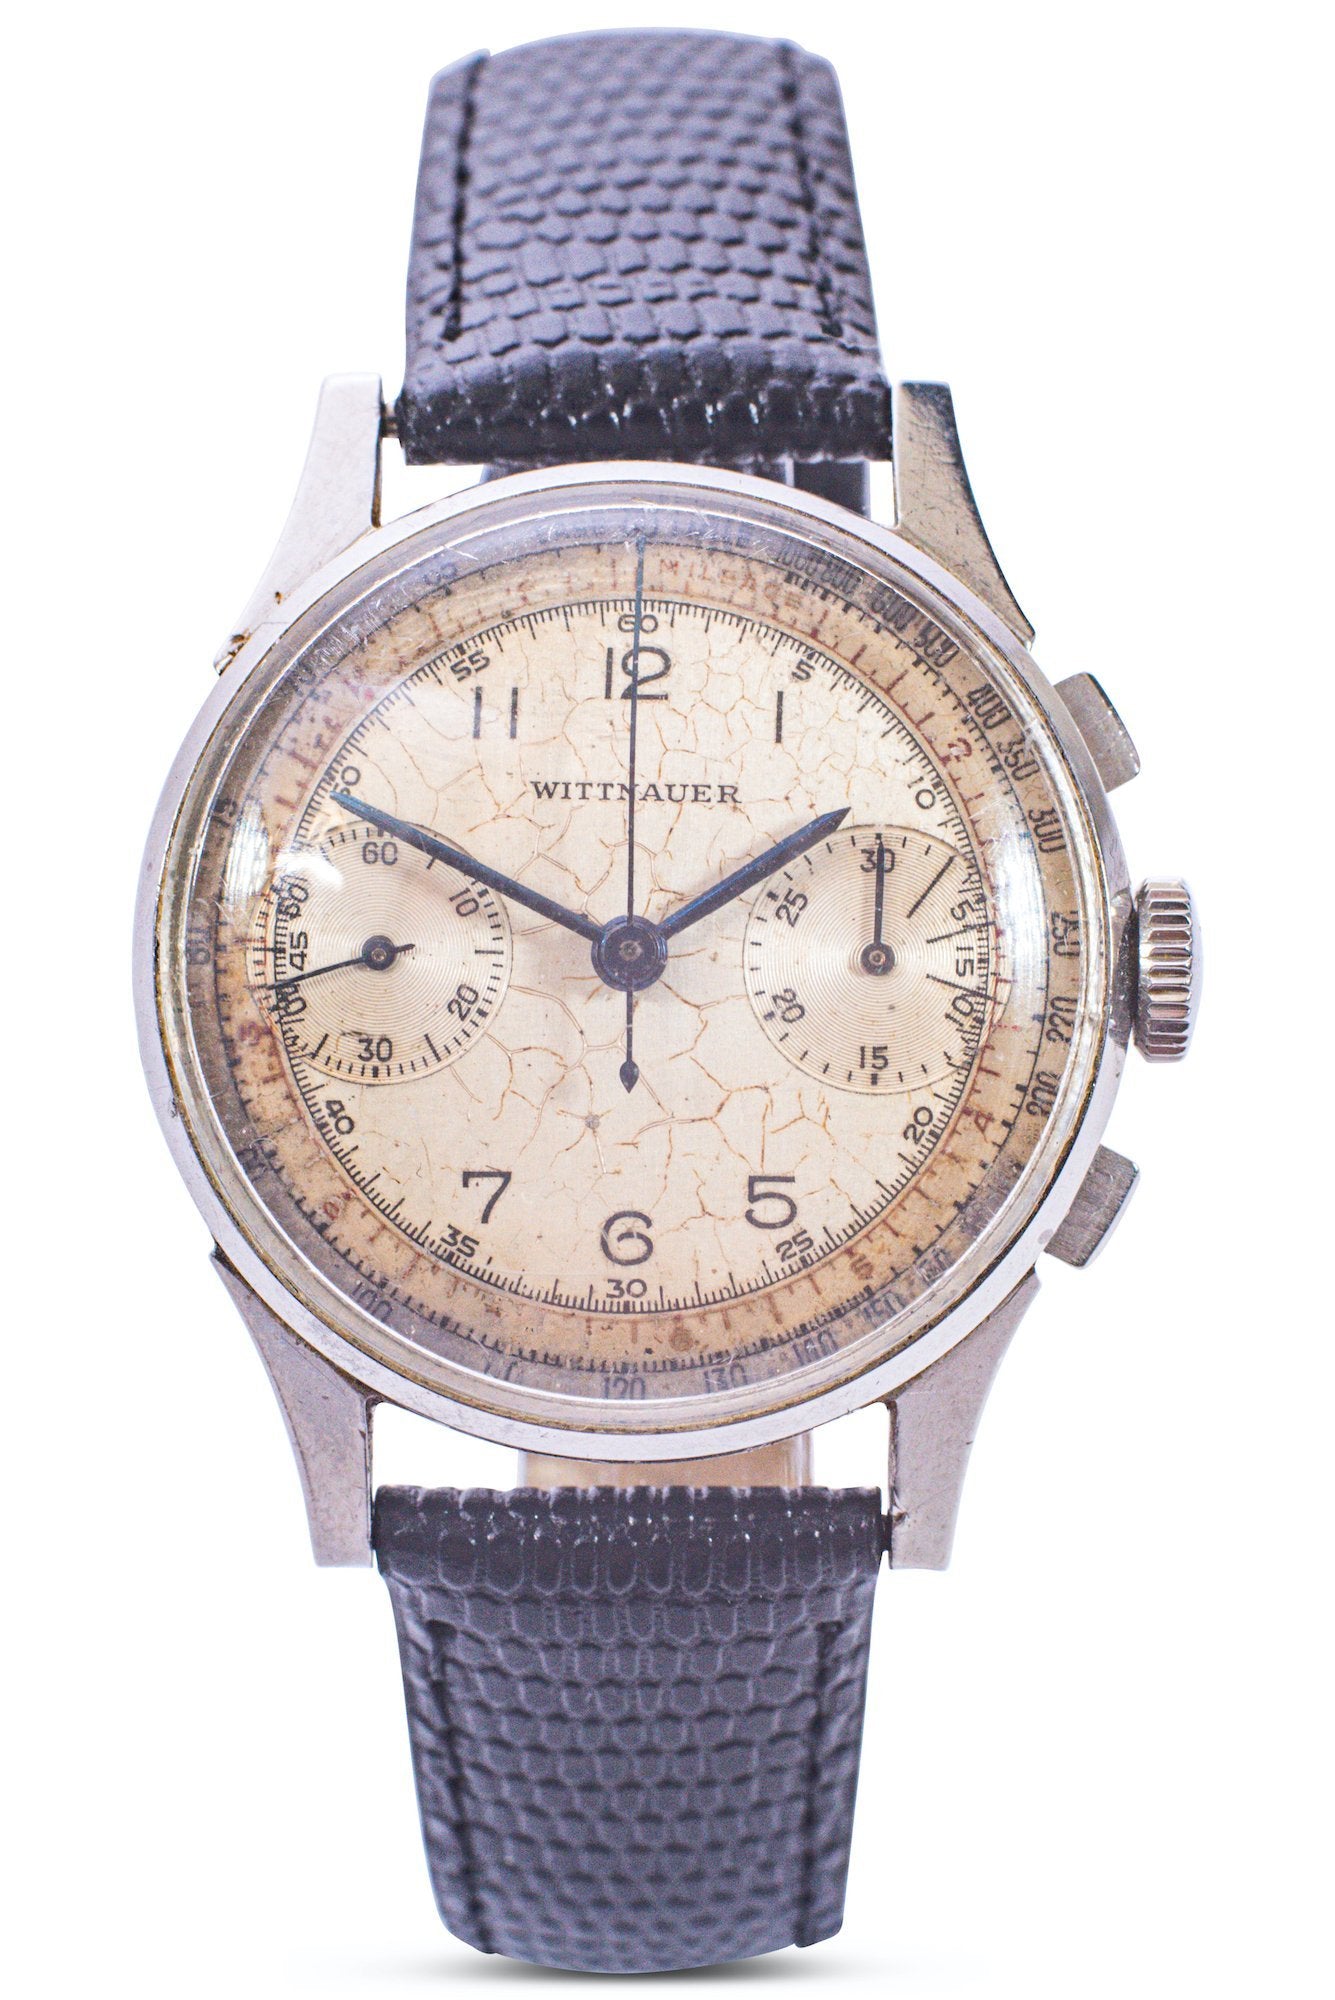 Wittnauer Chronograph - Counting Time Watch Purveyors